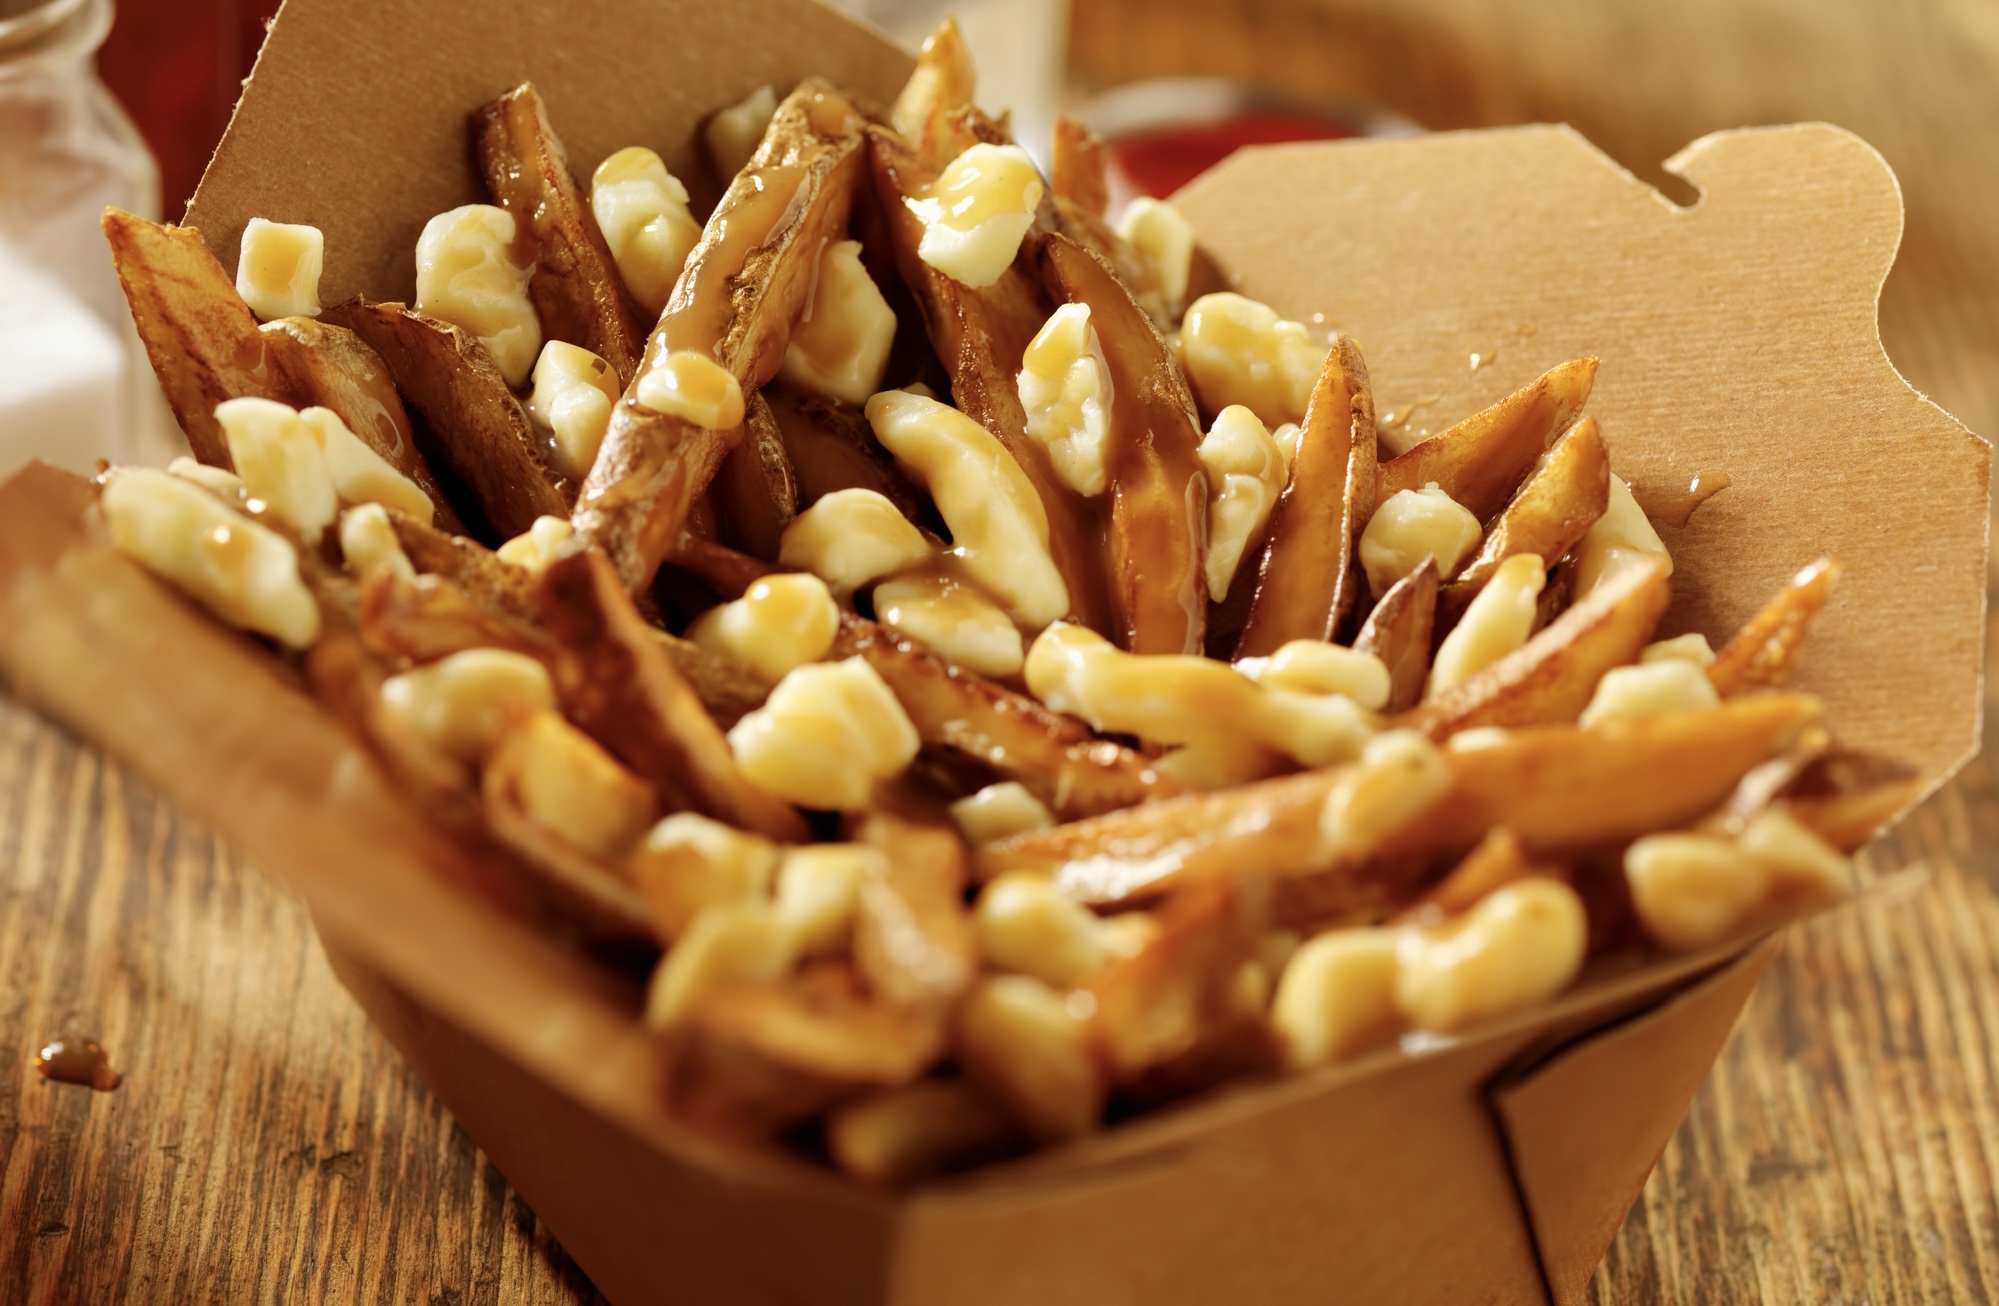 500 free poutines will be given out on April 20 by Chef on Call for their 15th anniversary